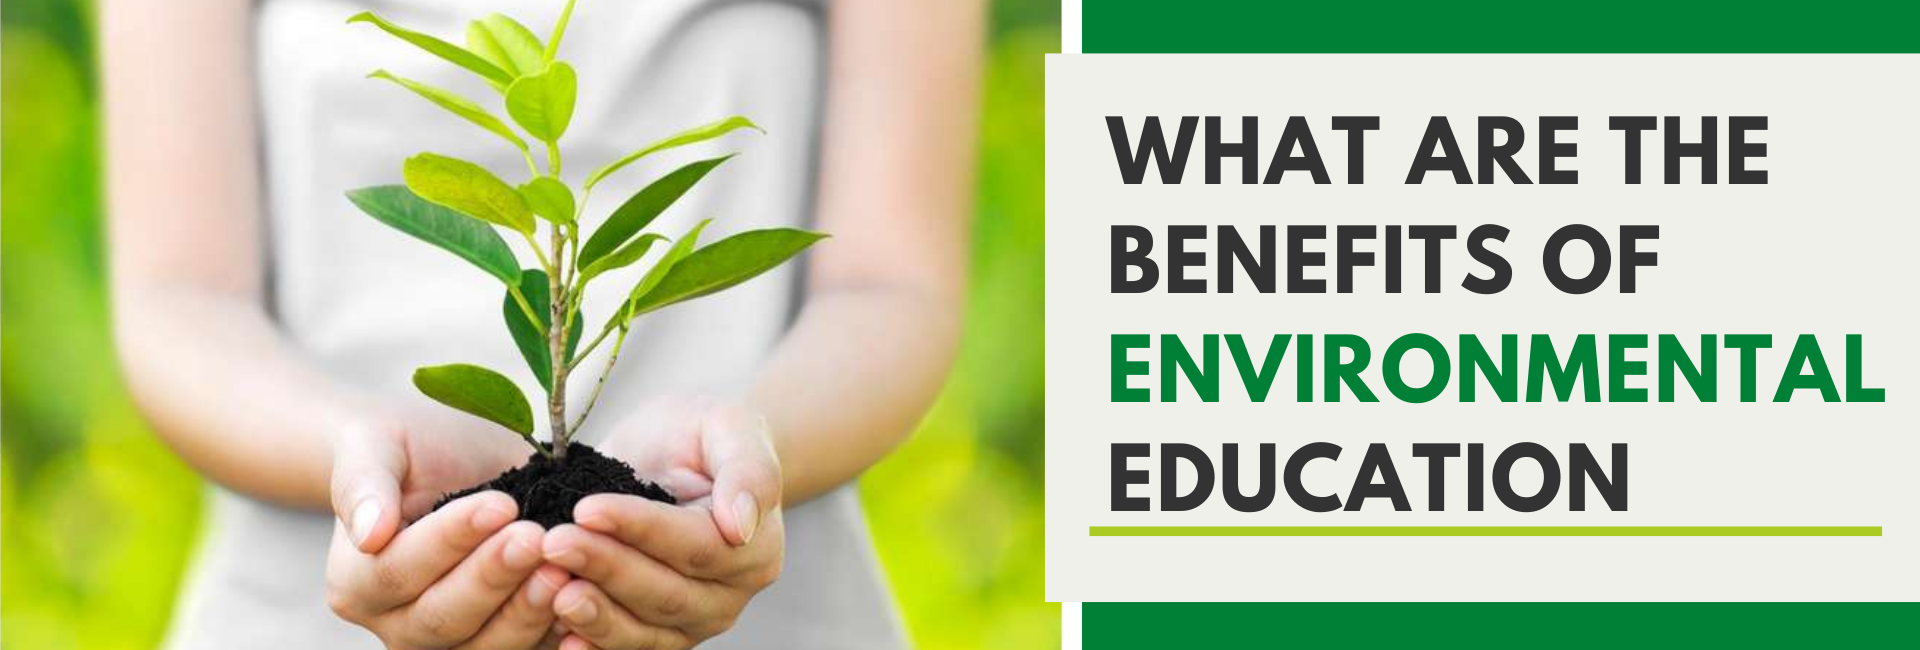 education environmental benefits 2021 role teacher learners types january different